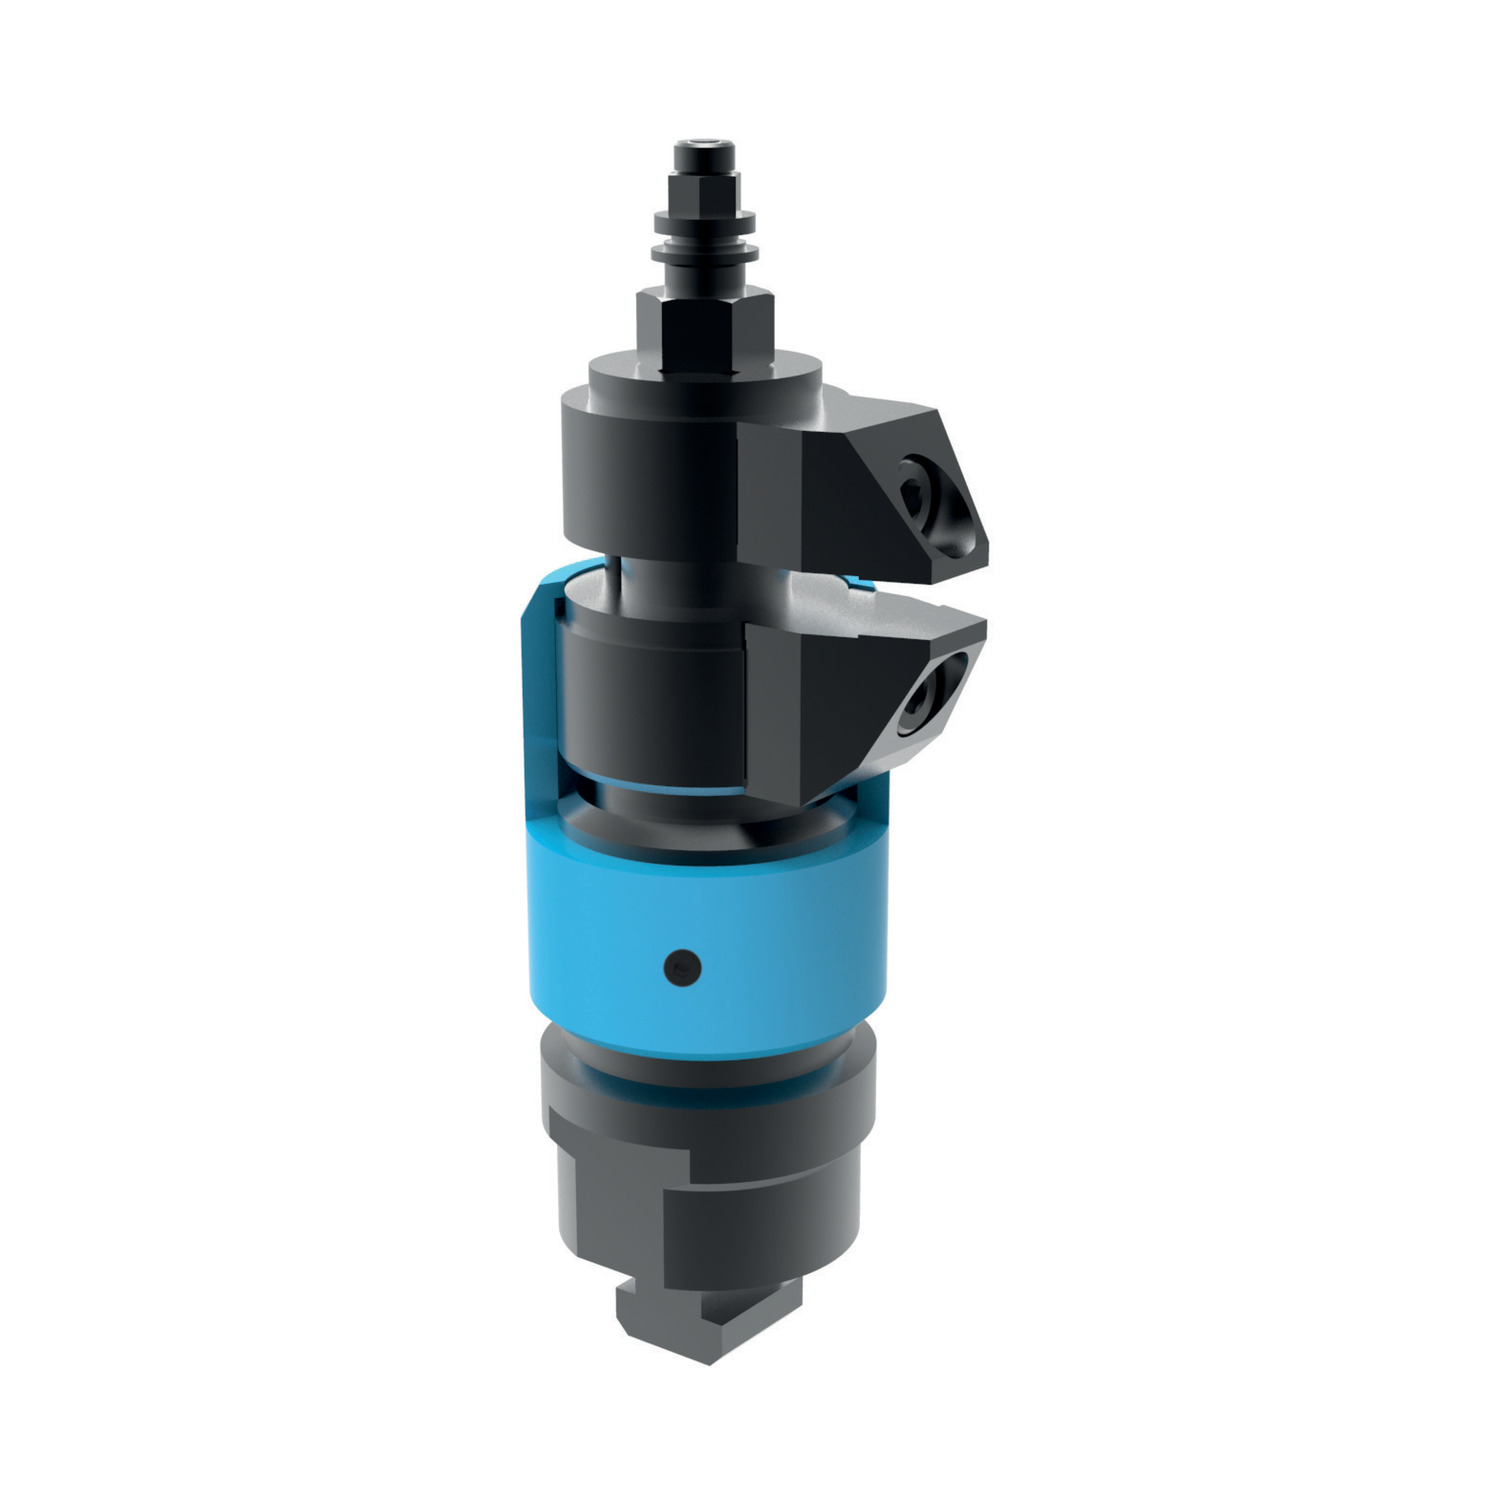 Floating Clamps M12 Separate clamping and locking. Useful for securing additional clamping points on extremely pliable workpieces, whilst minimising deformation. It also serves to reduce vibration during machining.